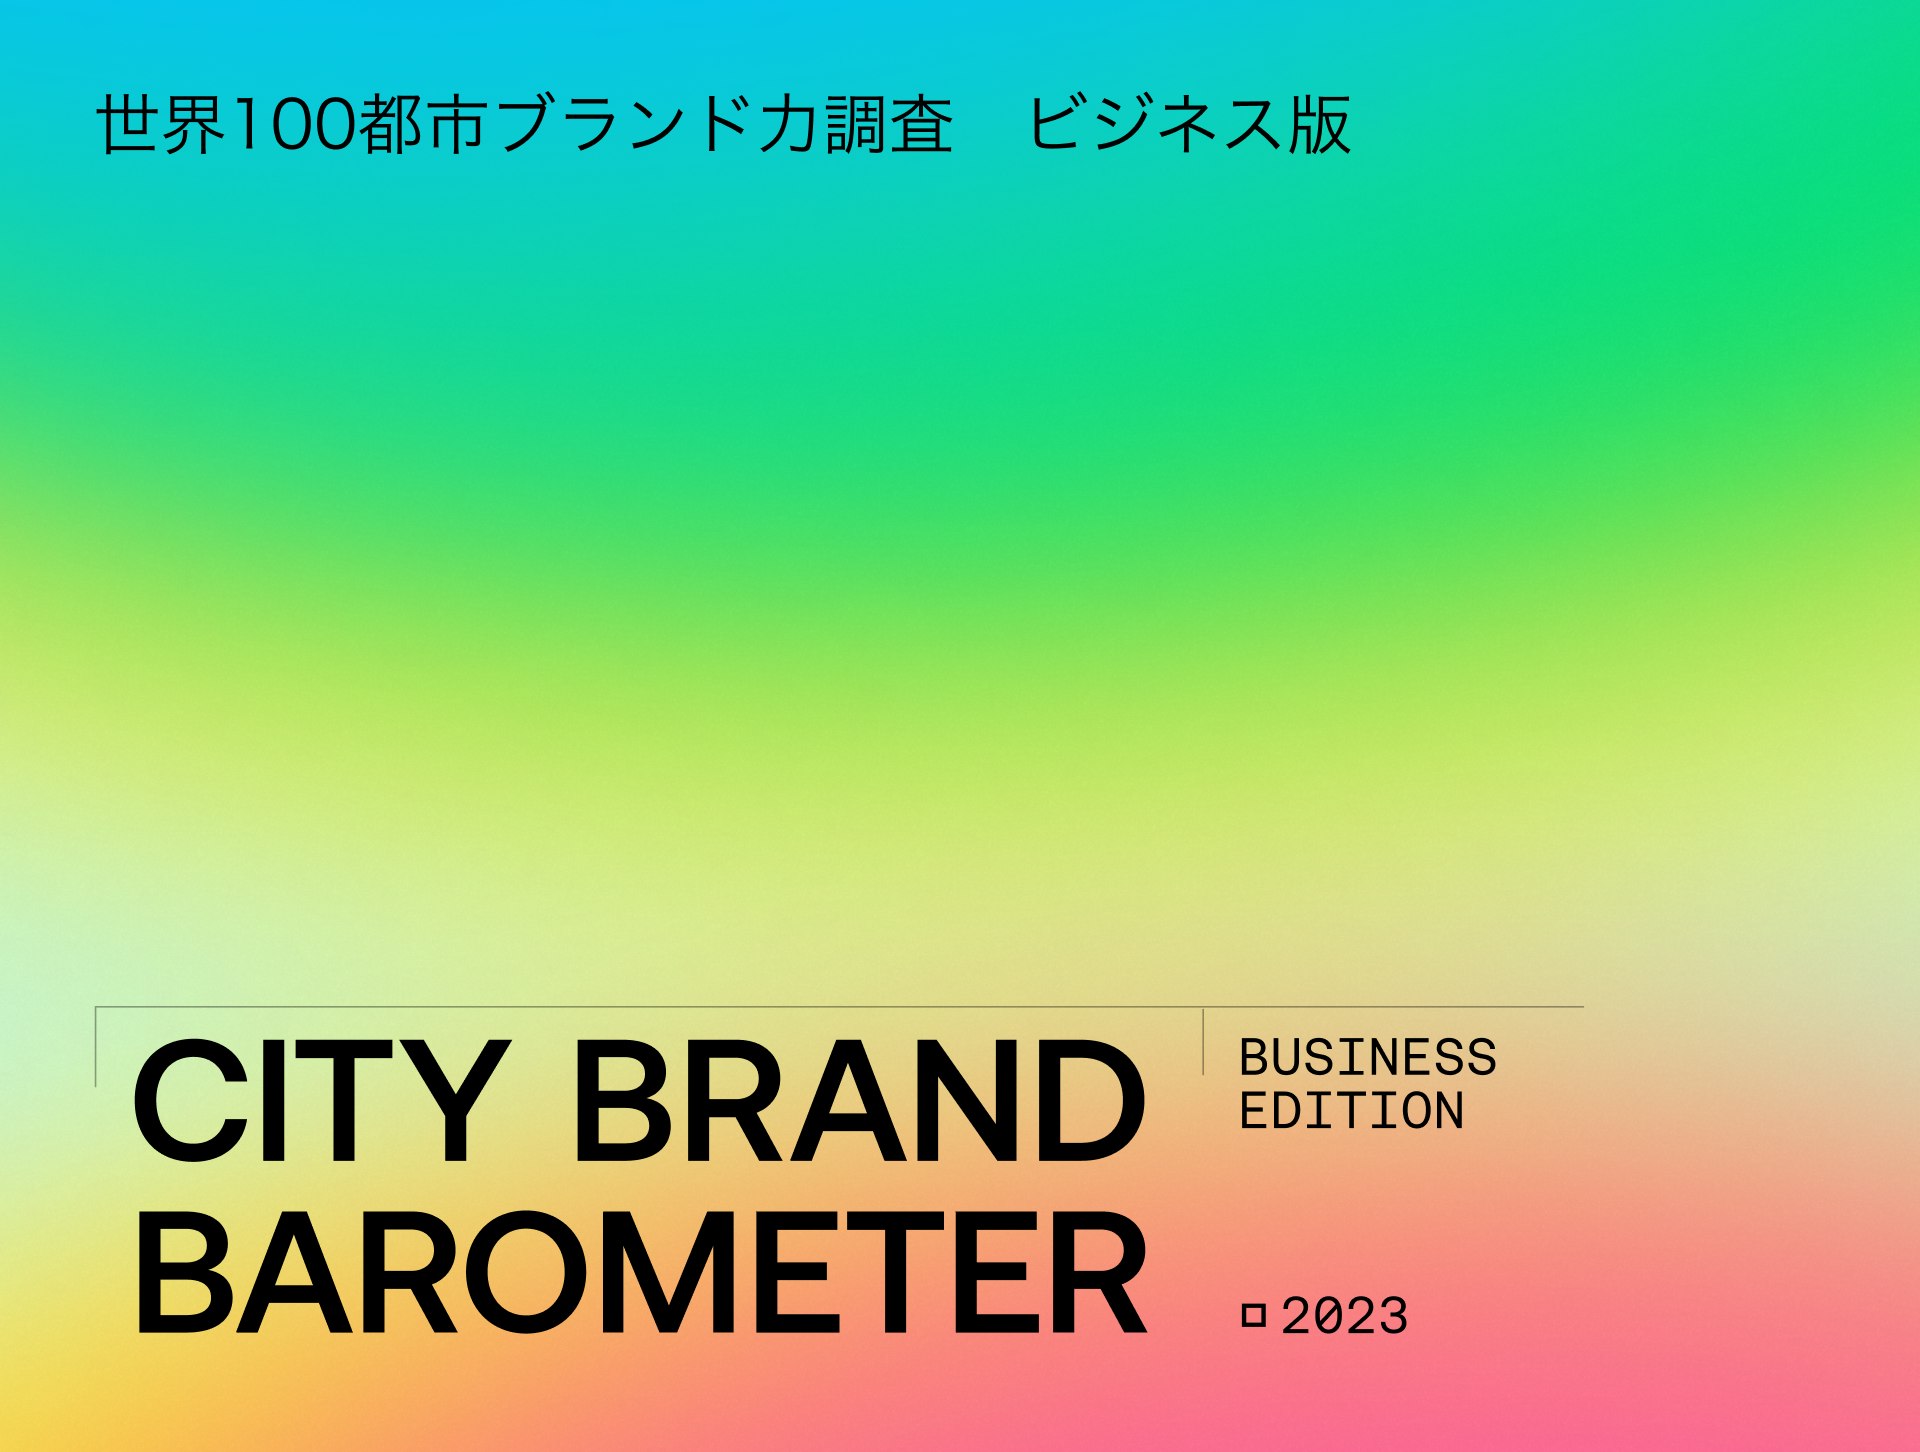 Rainbow gradient background with black text 'City Brand Barometer 2023 Business edition now available in Japanese'